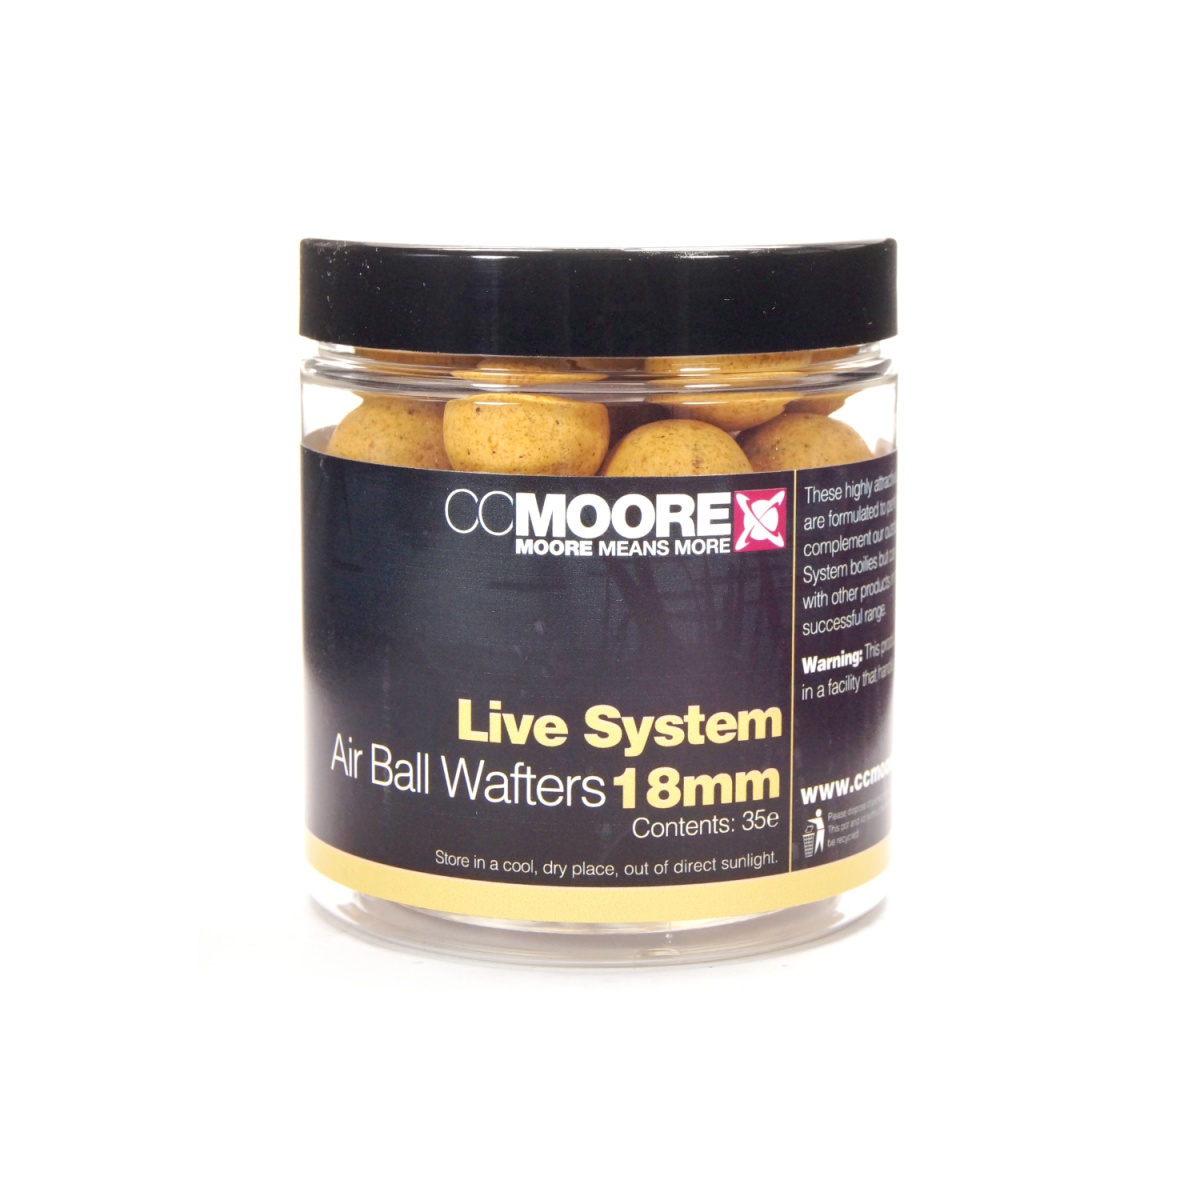 NEW CcMoore Live System Air Ball Wafters 18 mm rozmiar